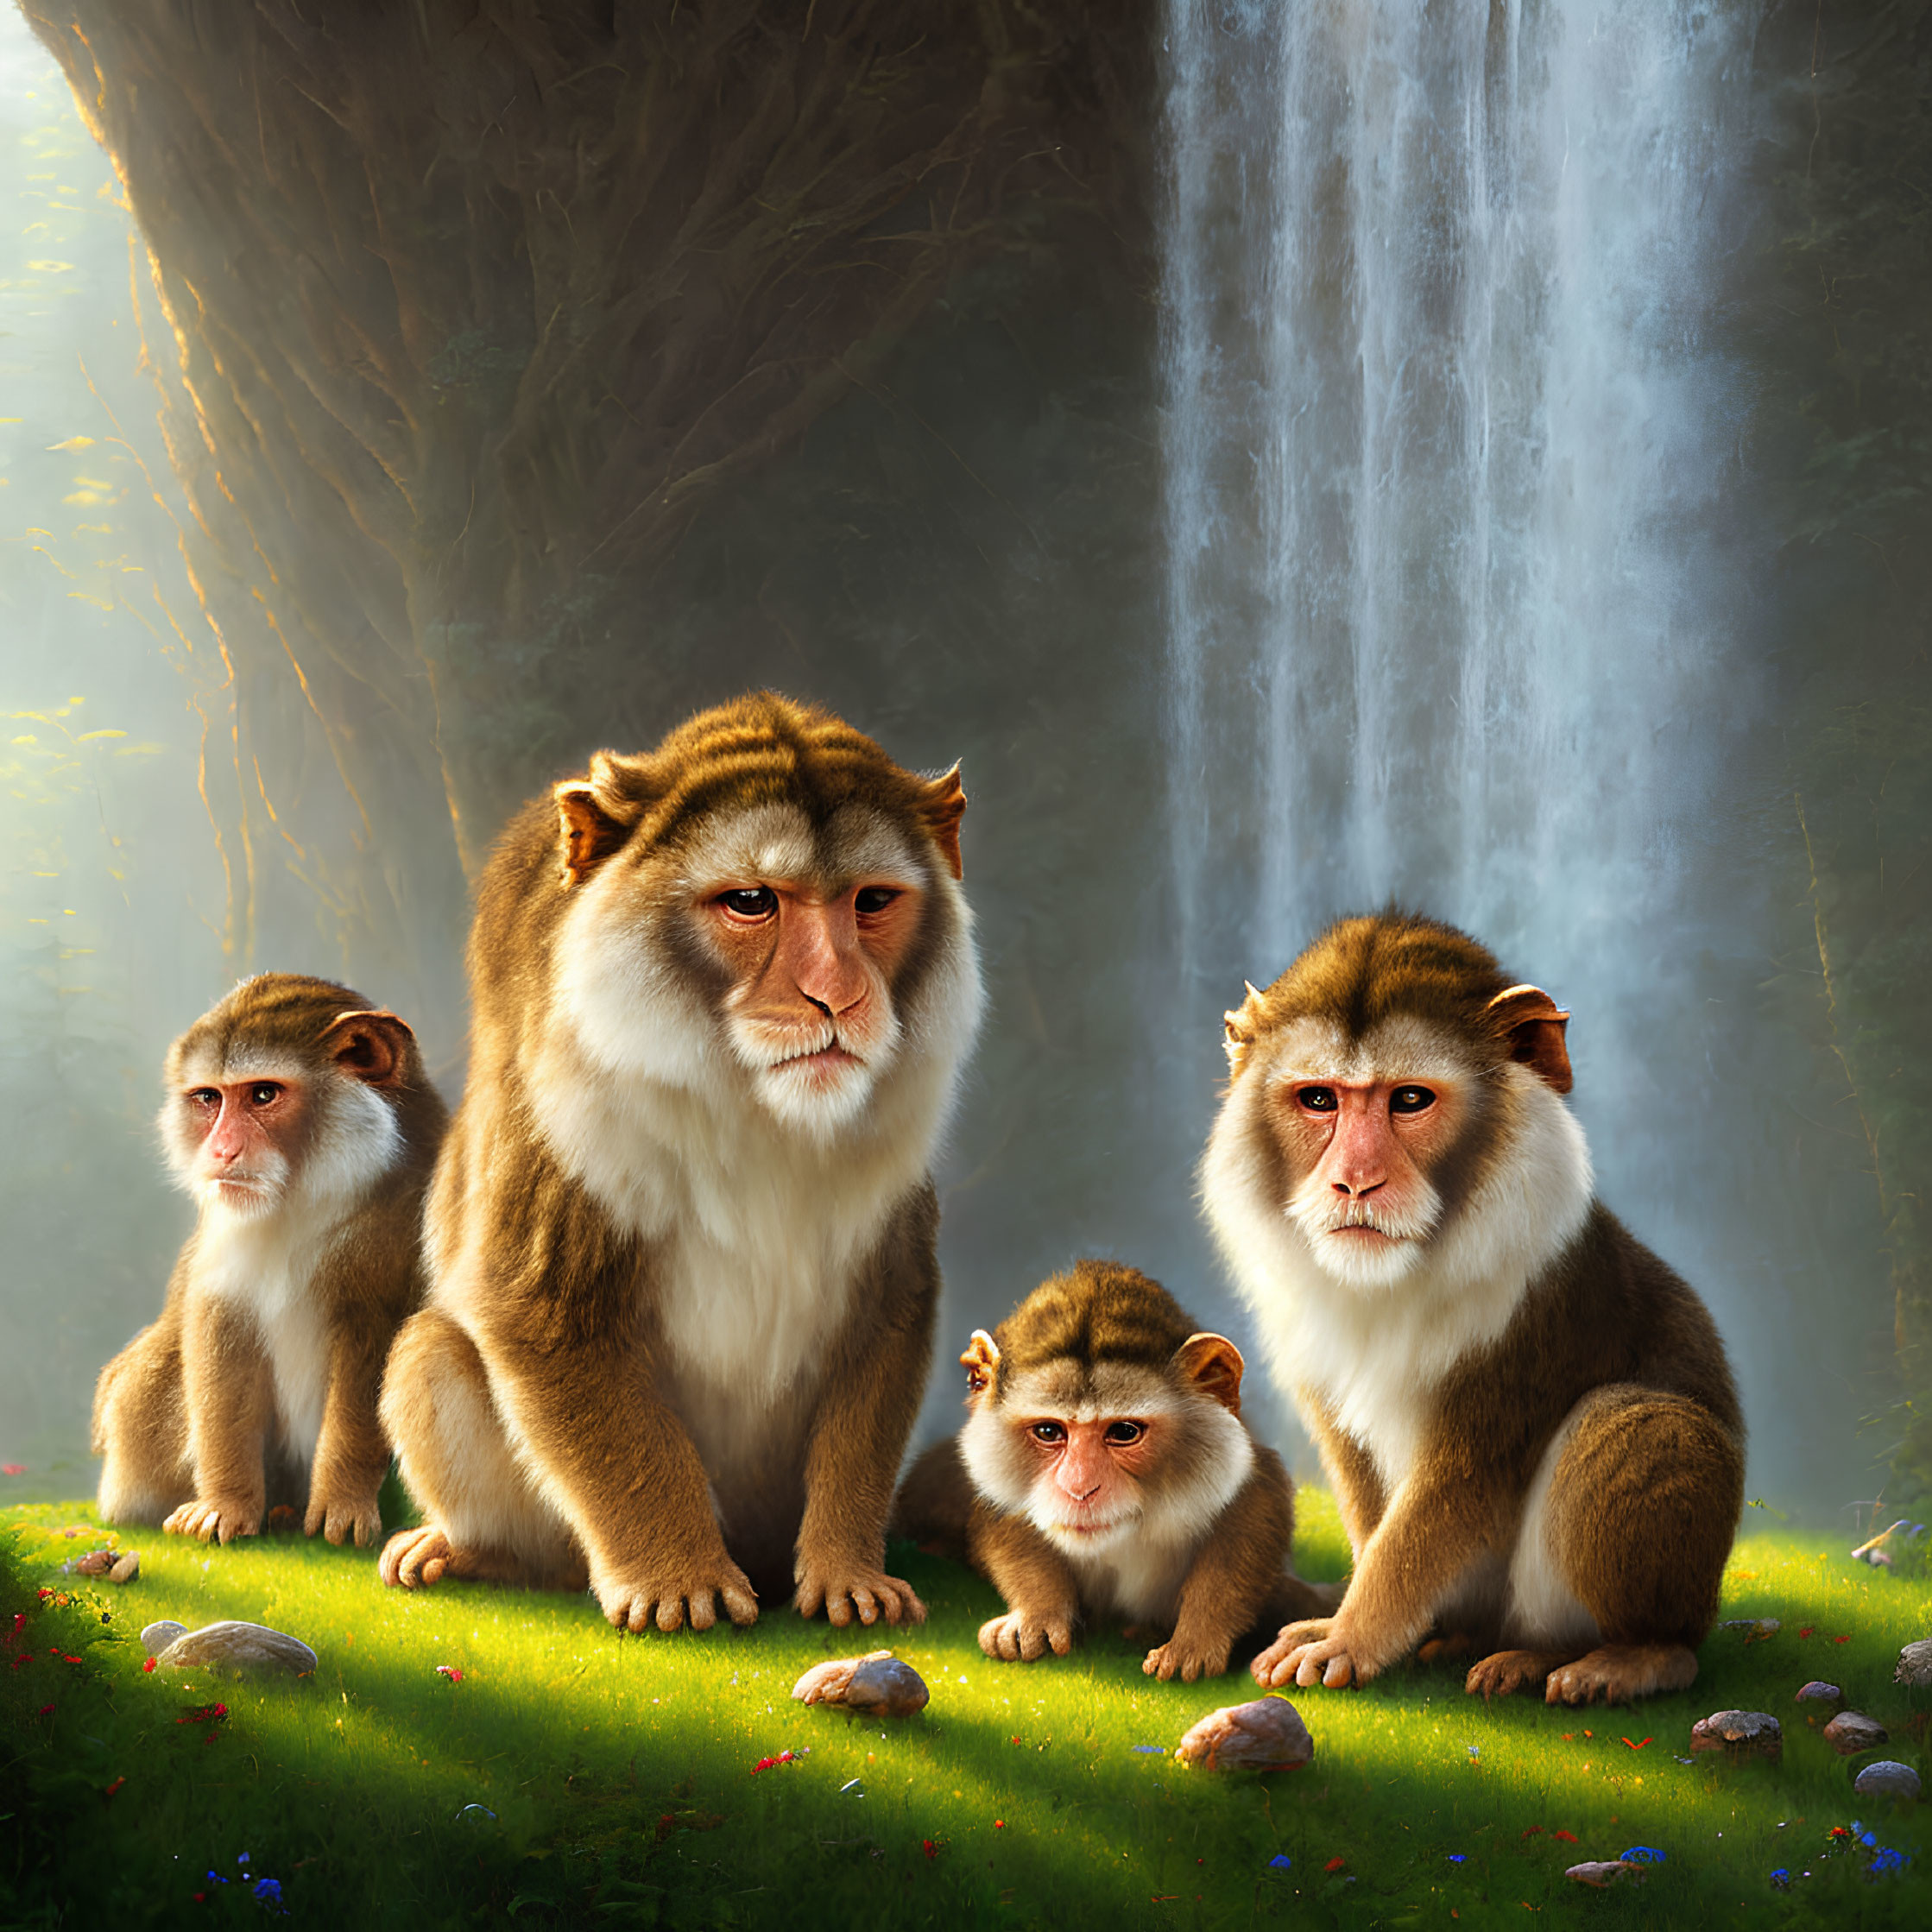 Anthropomorphic monkey family by waterfall in lush setting